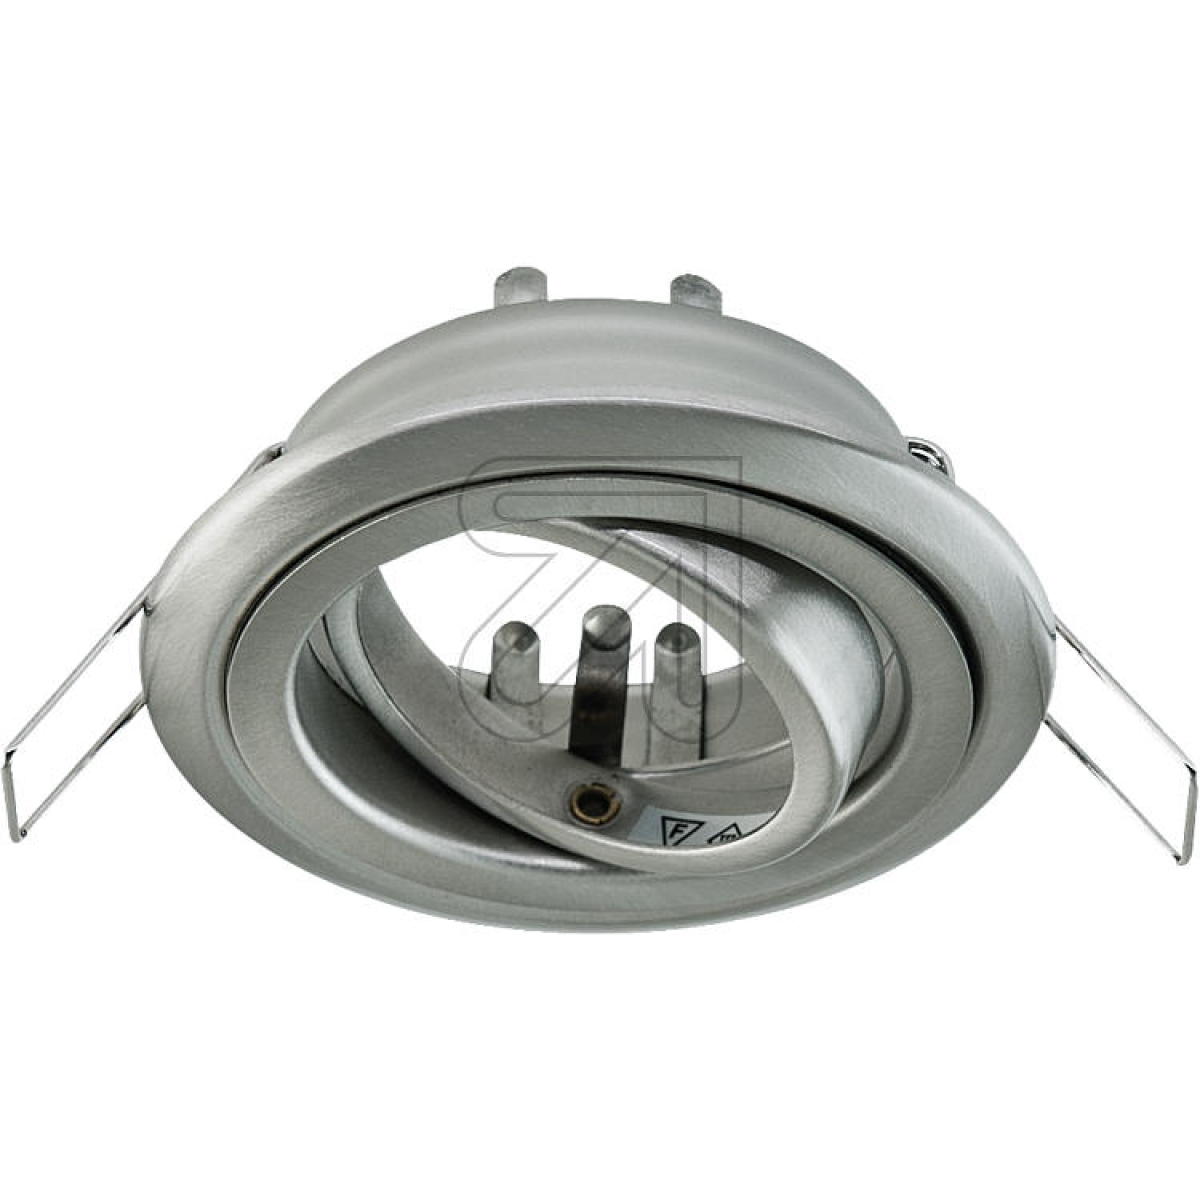 EVNRecessed spotlight chrome satin 752 013 without spring washer, rotatable and pivotableArticle-No: 653690